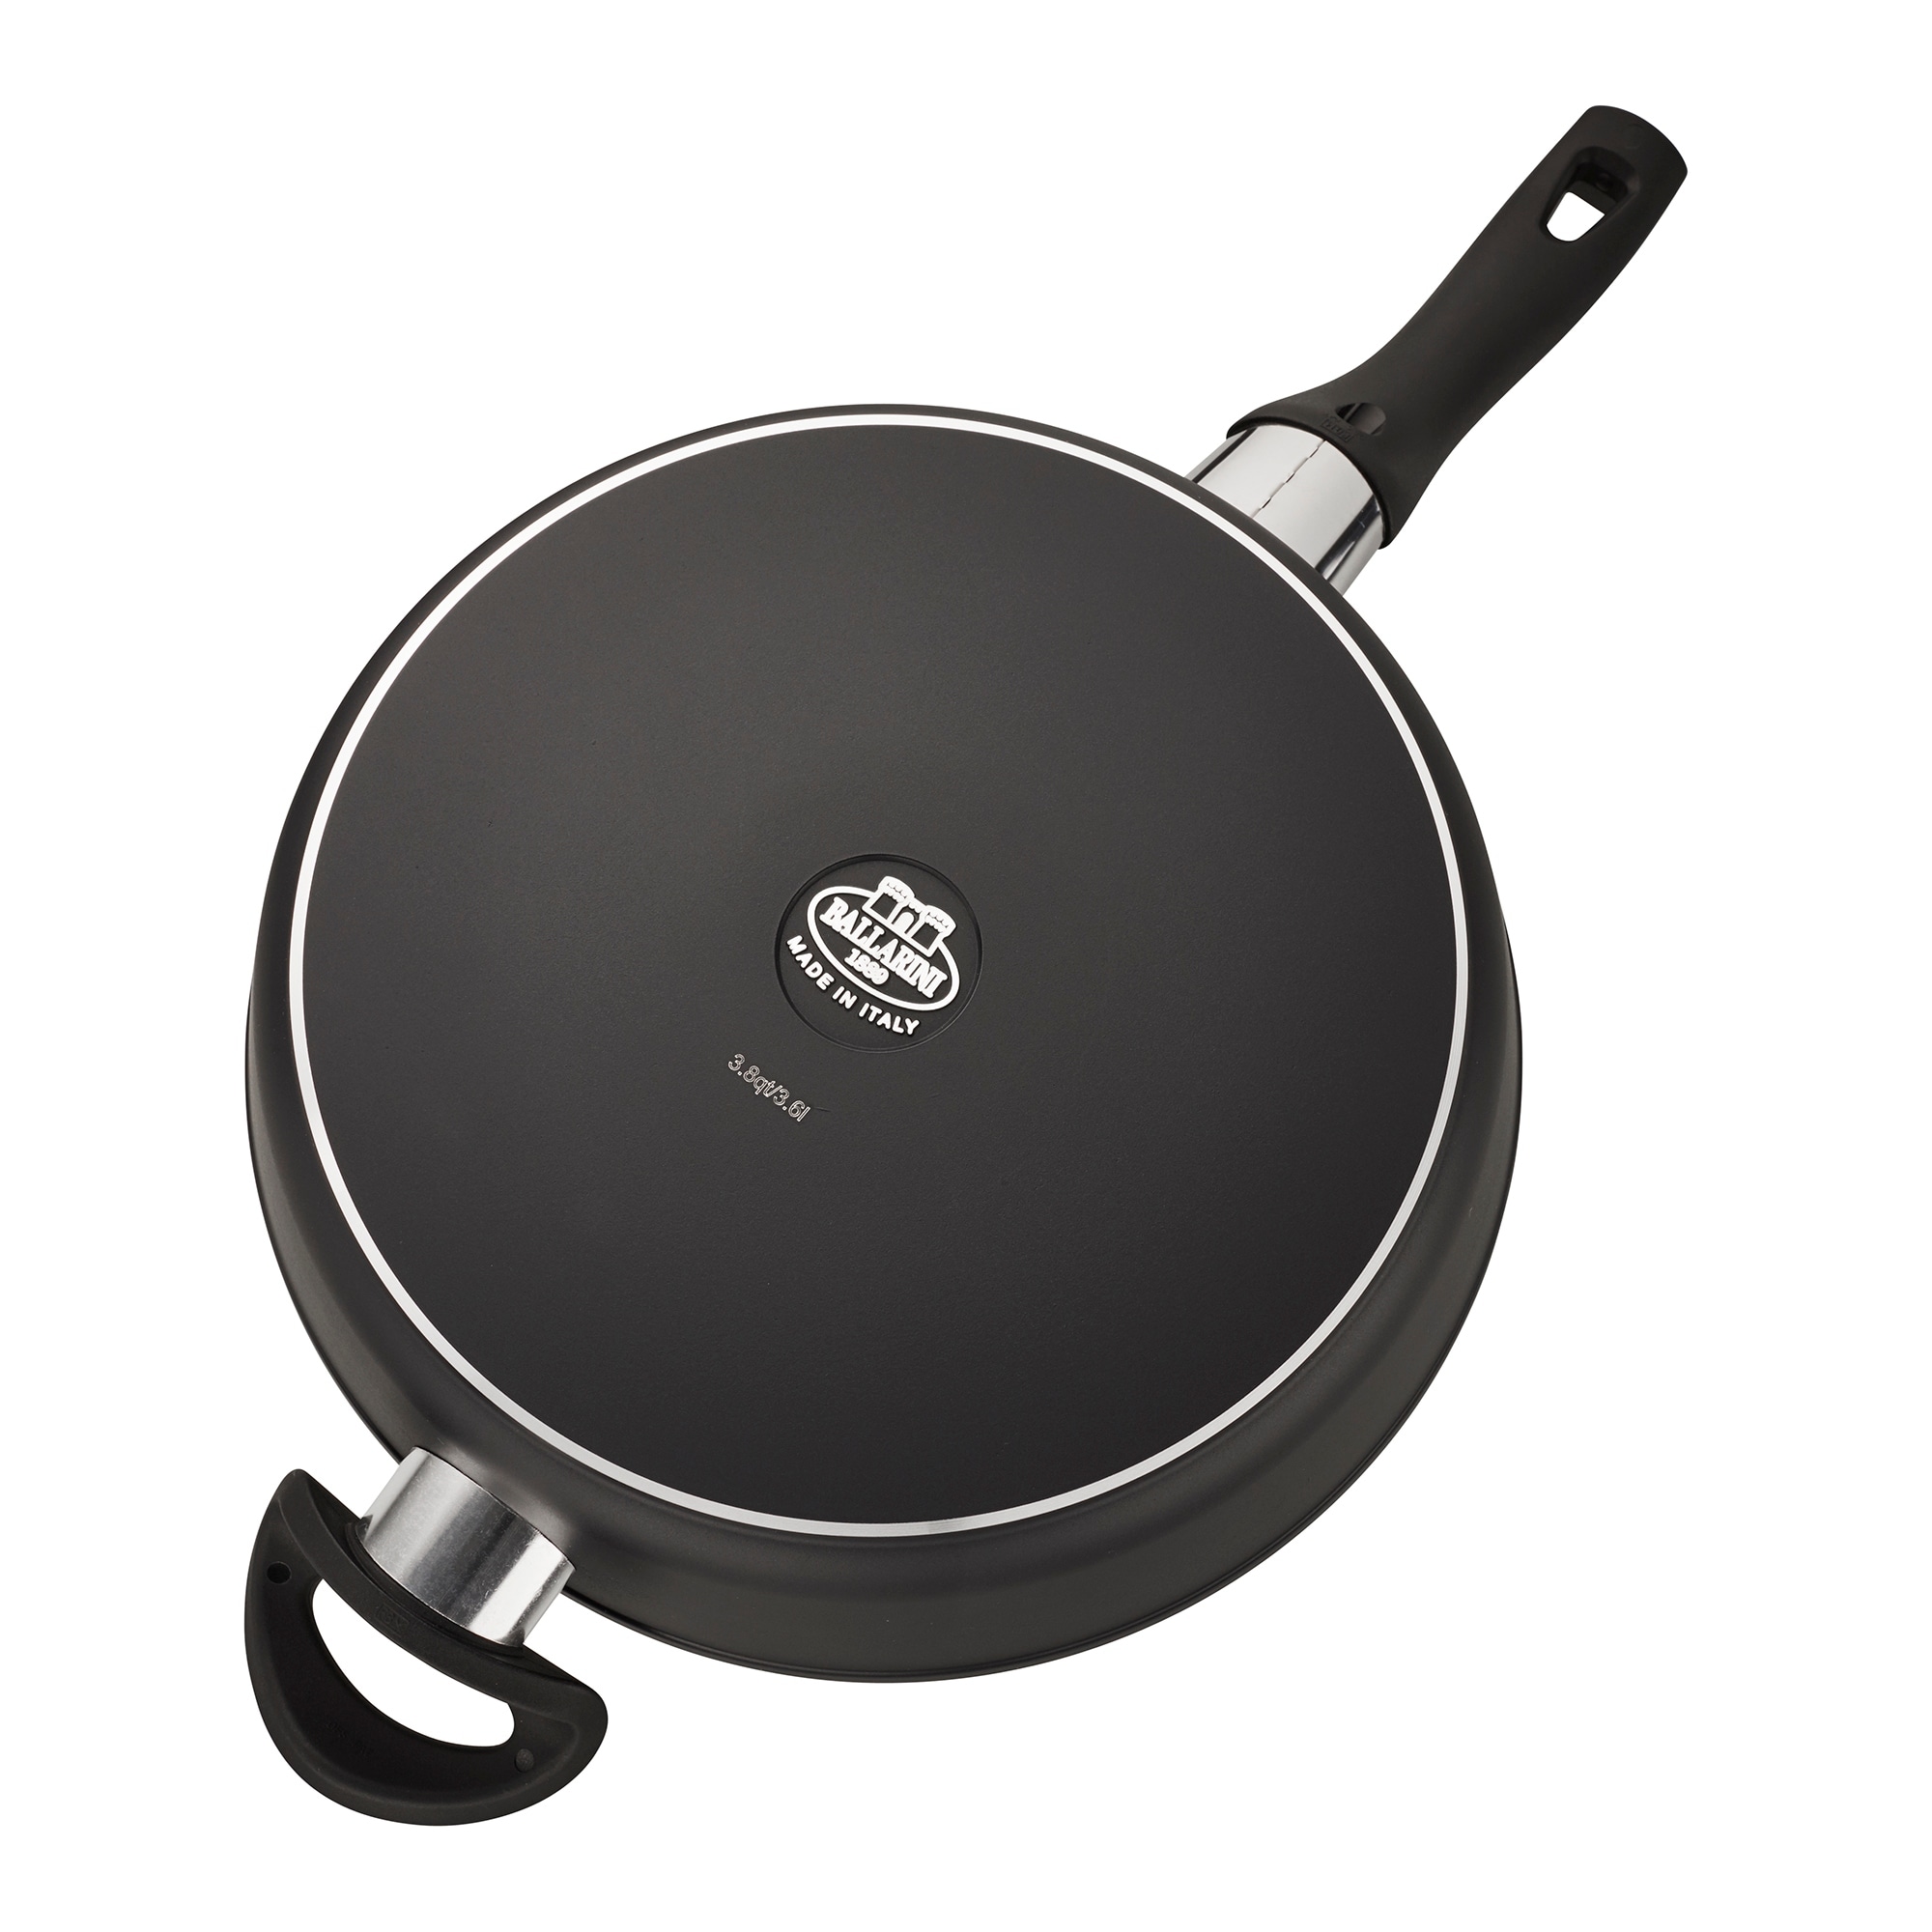 https://ak1.ostkcdn.com/images/products/is/images/direct/f1656749d1cbdfce51e708c66e8ca3a82f8783df/Ballarini-Como-Forged-Aluminum-Nonstick-Saute-Pan-with-Lid.jpg